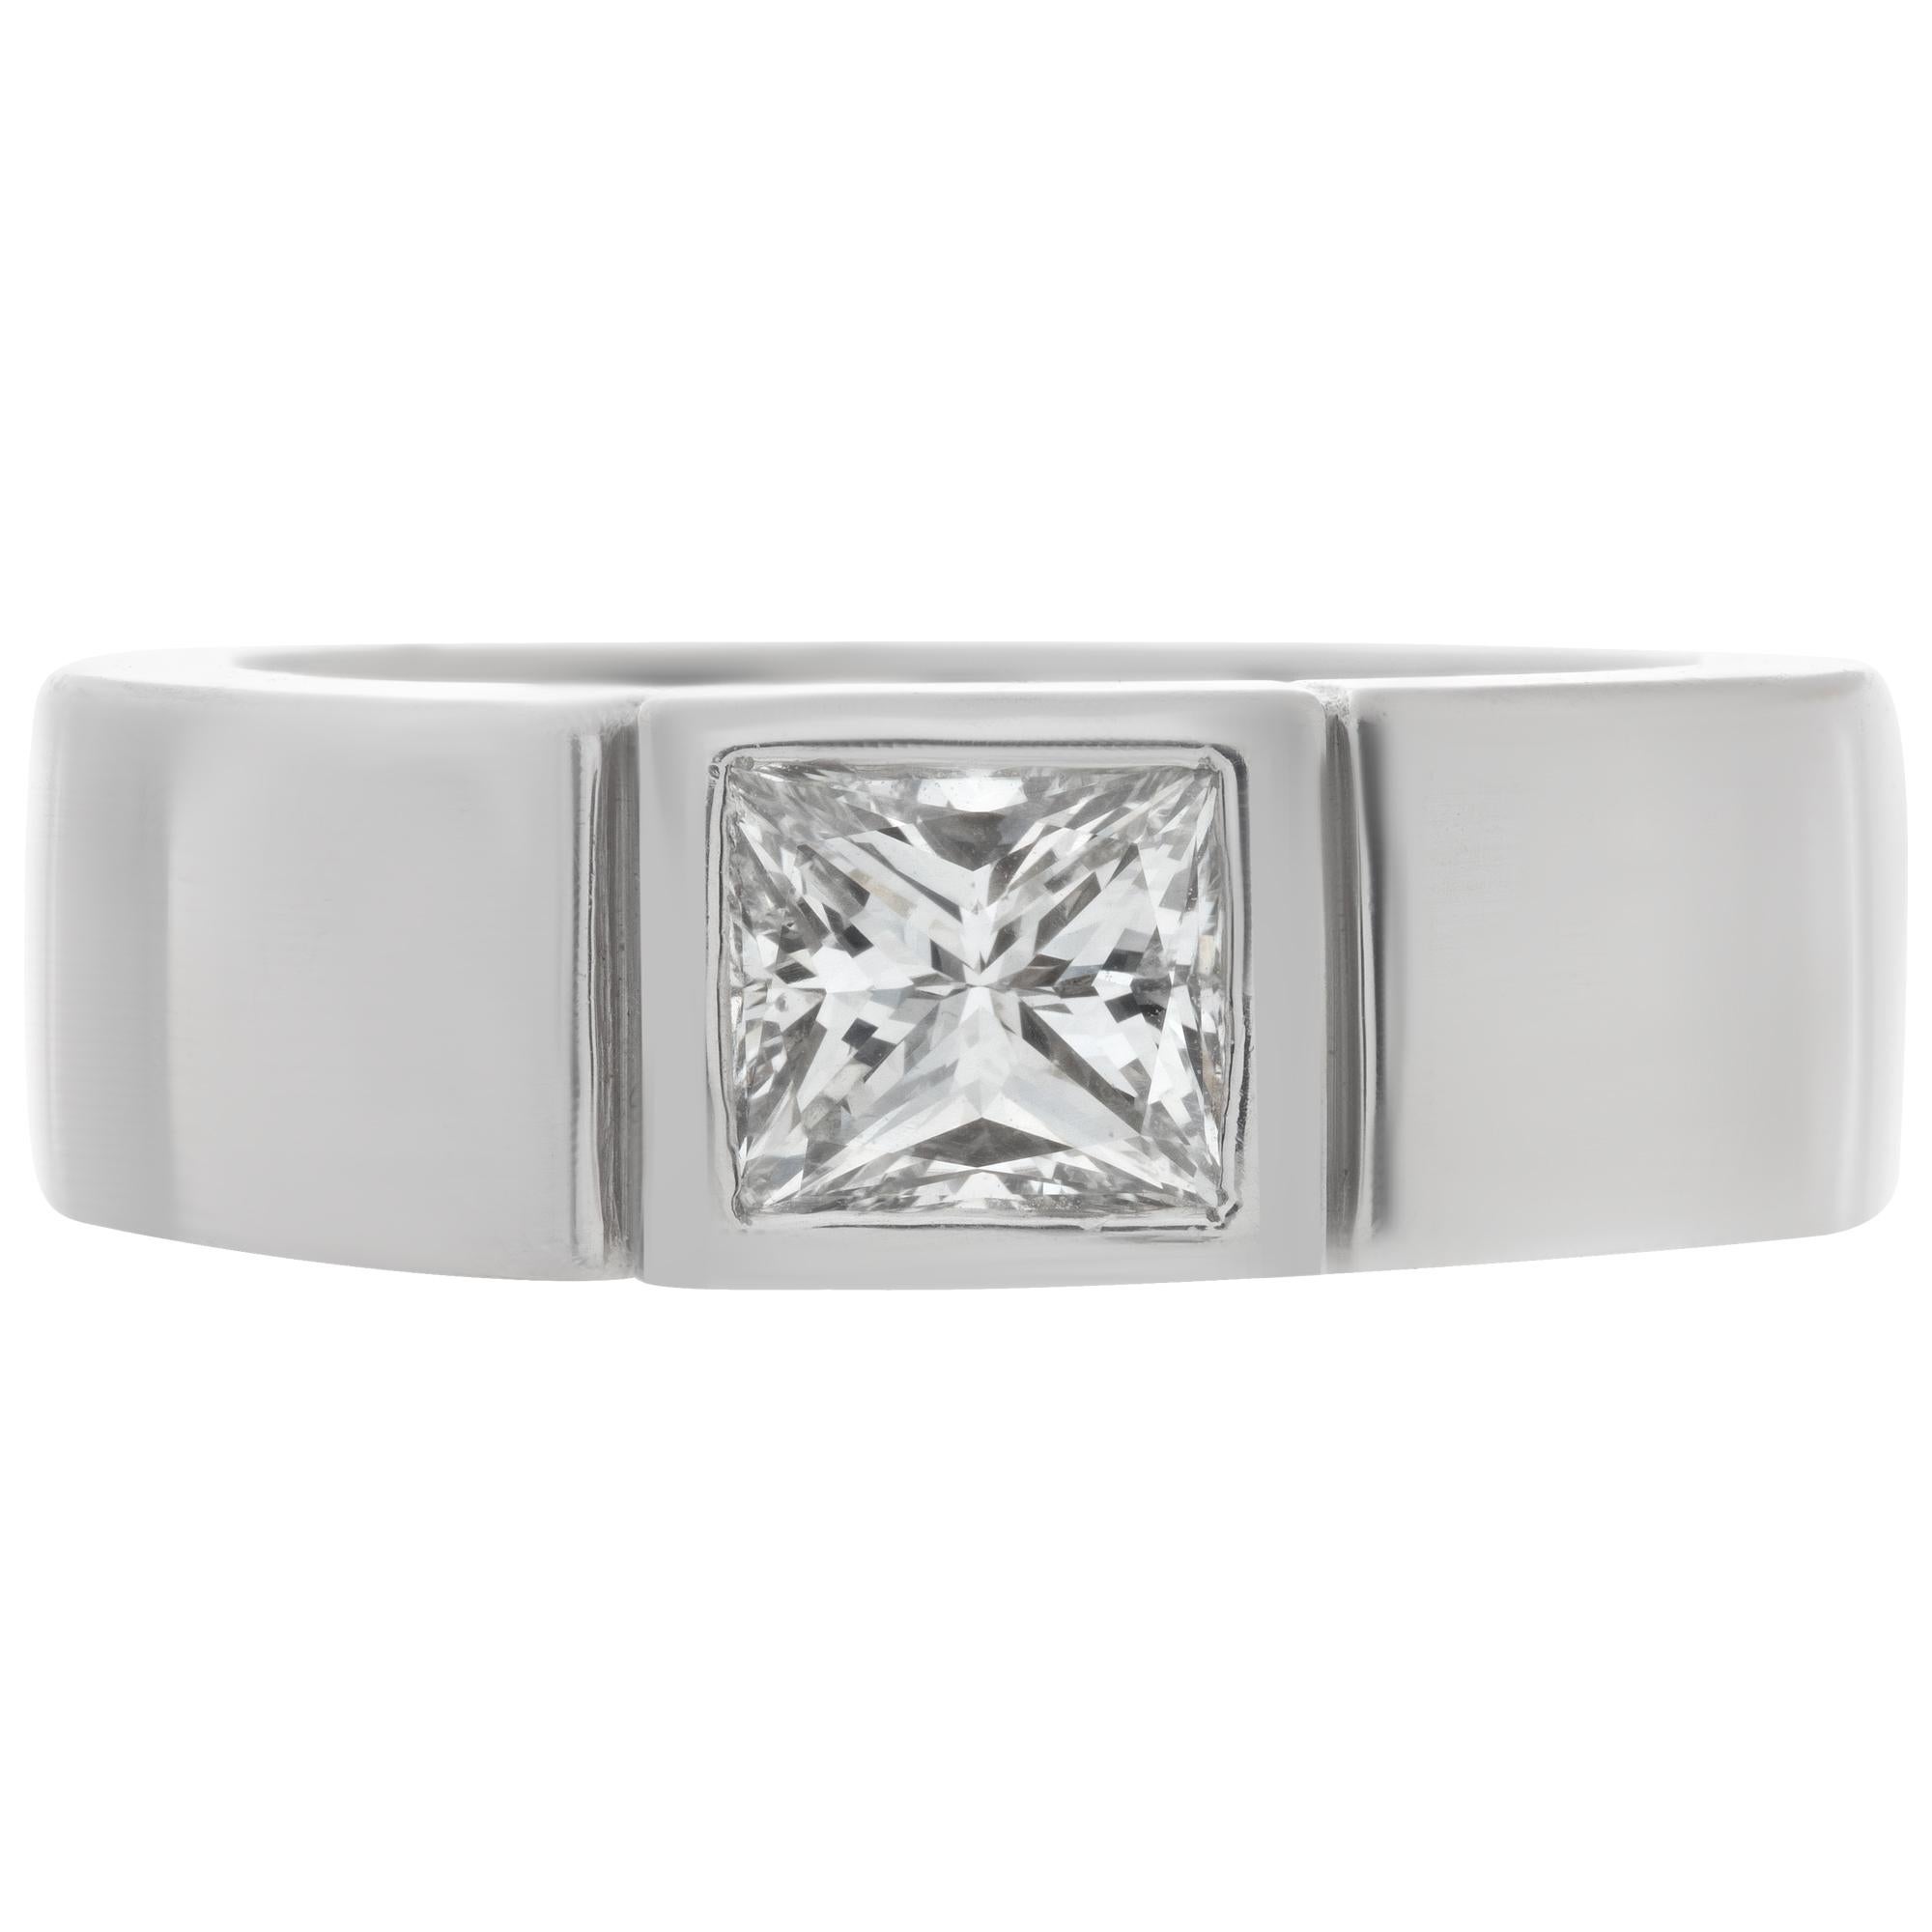 EGL certified princess cut diamond 1.03 carat (H color, VS1 clarity) solitaire ring set in heavy platinum mounting. Size 7

This GIA certified ring is currently size 7 and some items can be sized up or down, please ask! It weighs 13.1 gramms and is